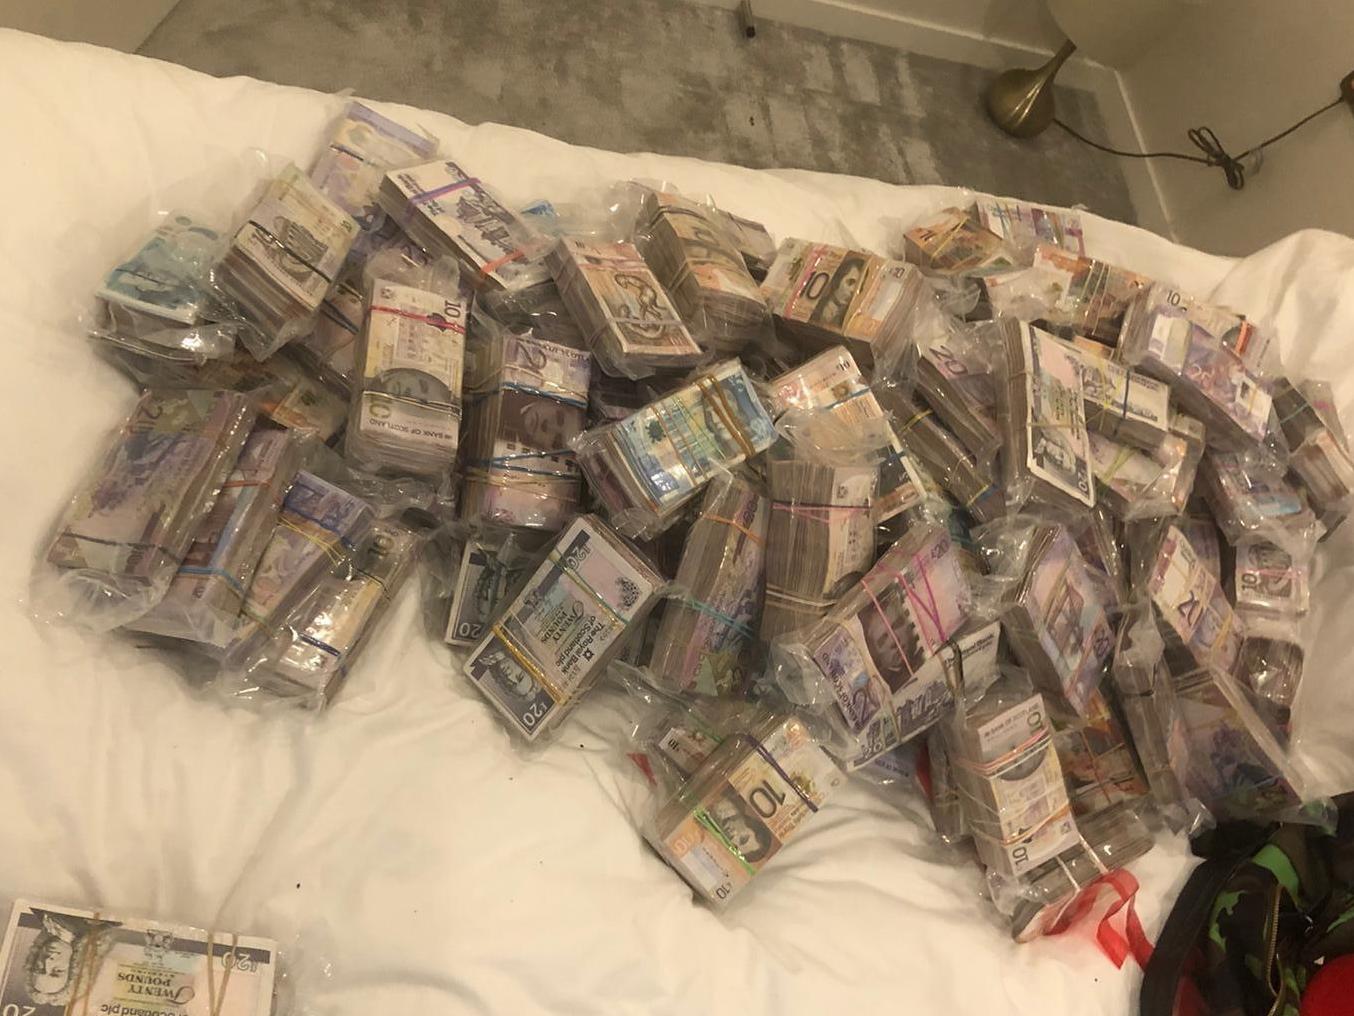 A quantity of cash seized by officers under Operation Venetic in London